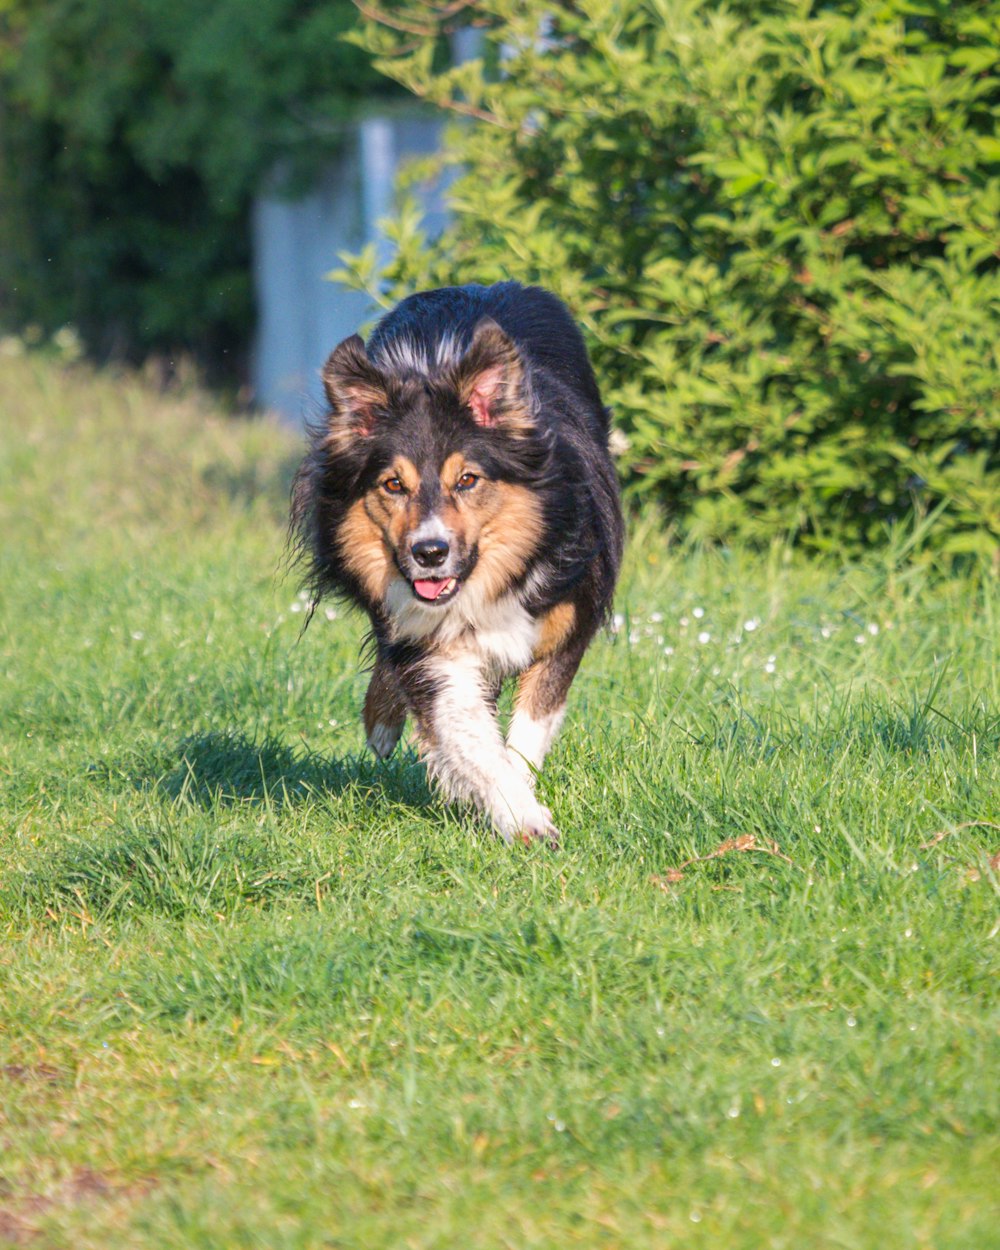 black and brown long coated dog running on green grass during daytime